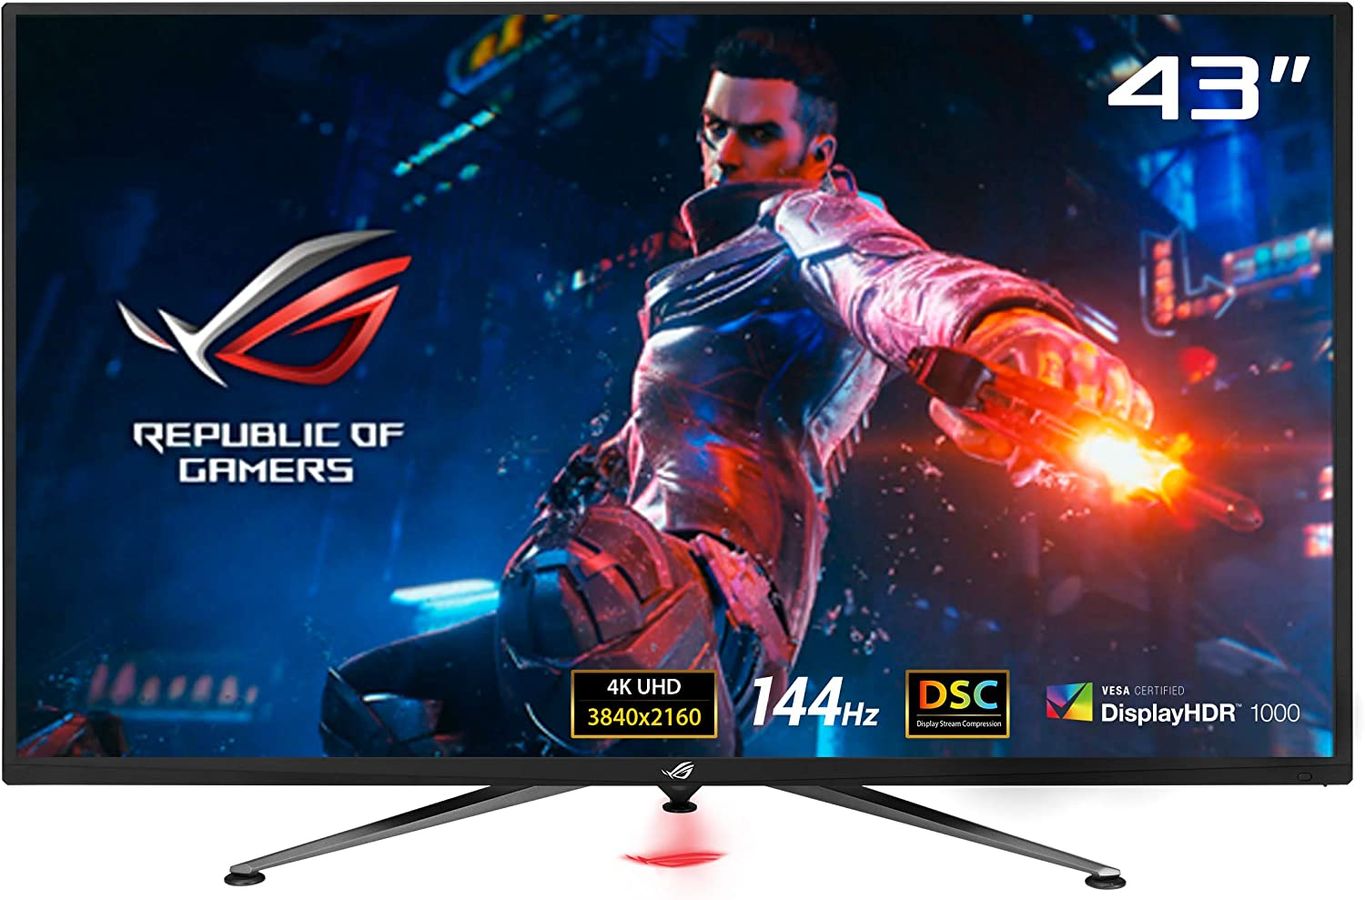 ASUS ROG Swift PG43UQ product image of a black, 43-inch monitor with someone on the display holding a red lit-up weapon in left hand.